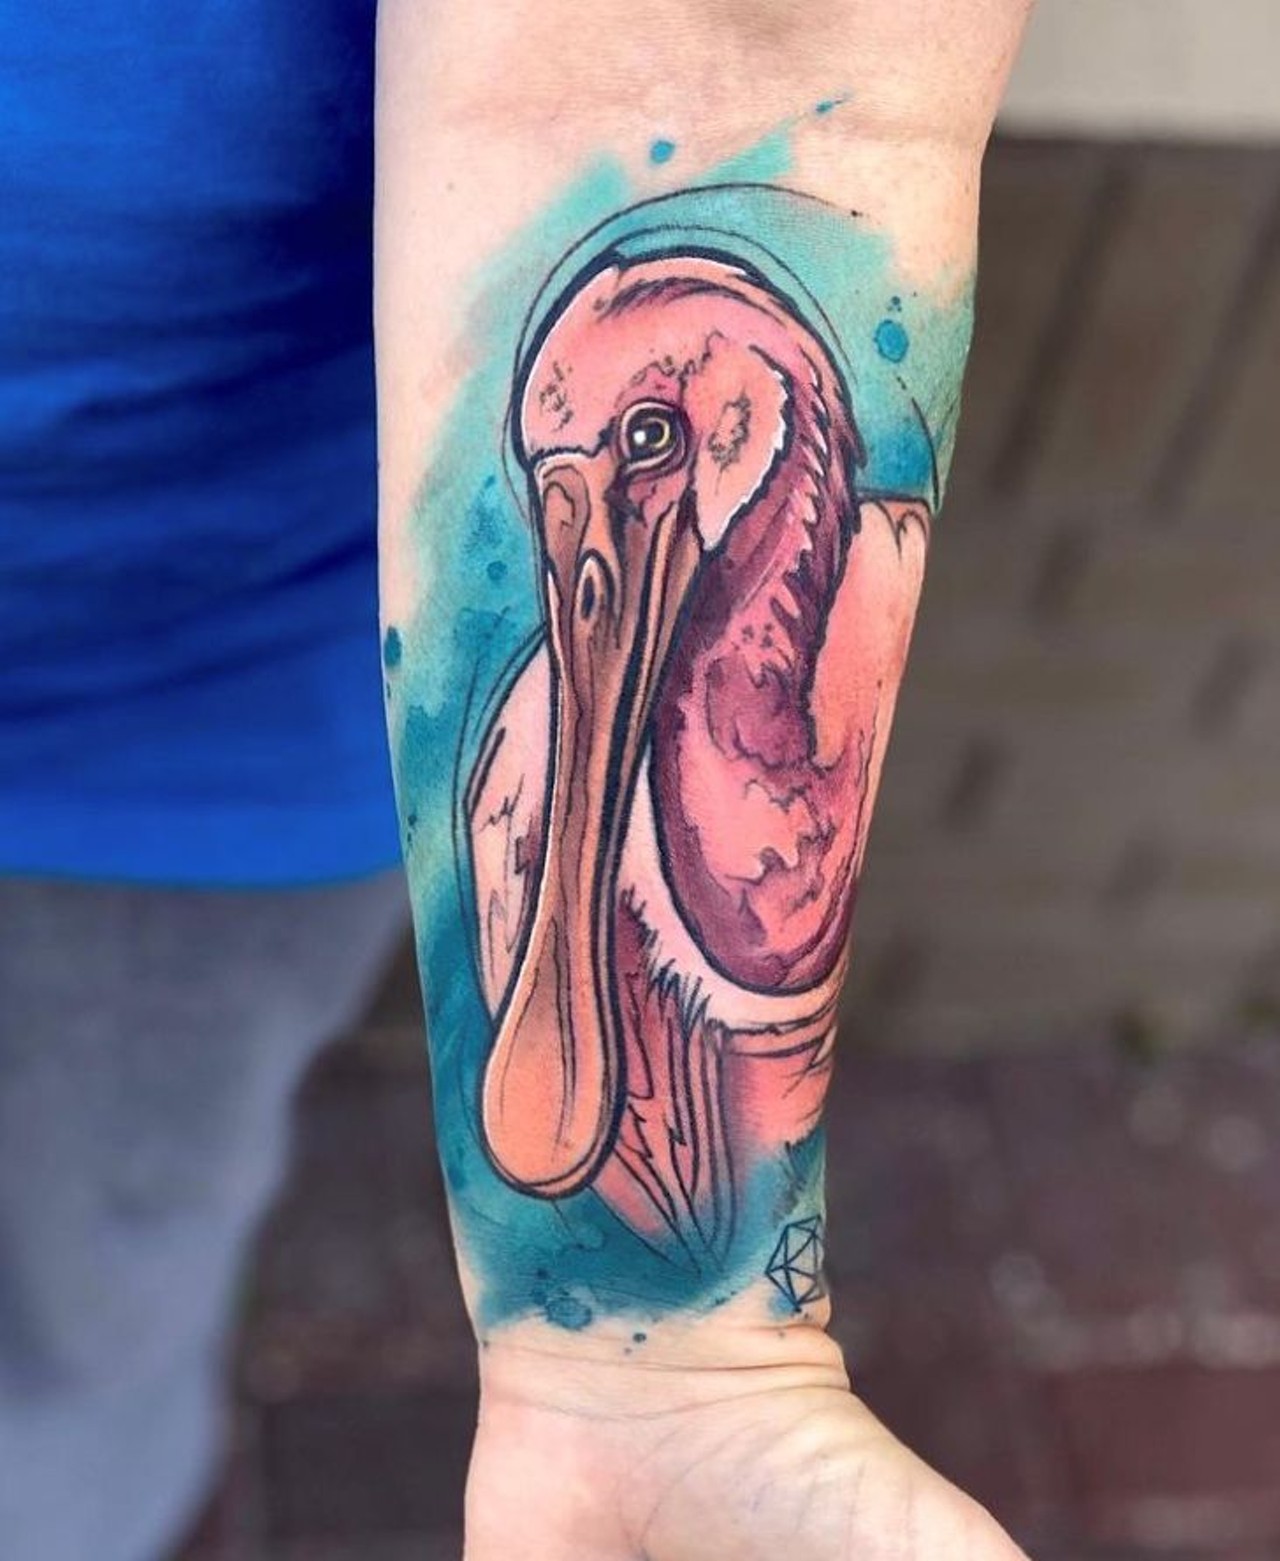 Gina Fote 
Arlia Tattoo
1317 Florida Mall Ave., 407-250-6040
Gina Fote&#146;s tattoo style includes watercolors, illustrative Disney pieces, pet portraits and more. She&#146;s currently working out of Arlia Tattoo. 
Photo via ginafote/Instagram